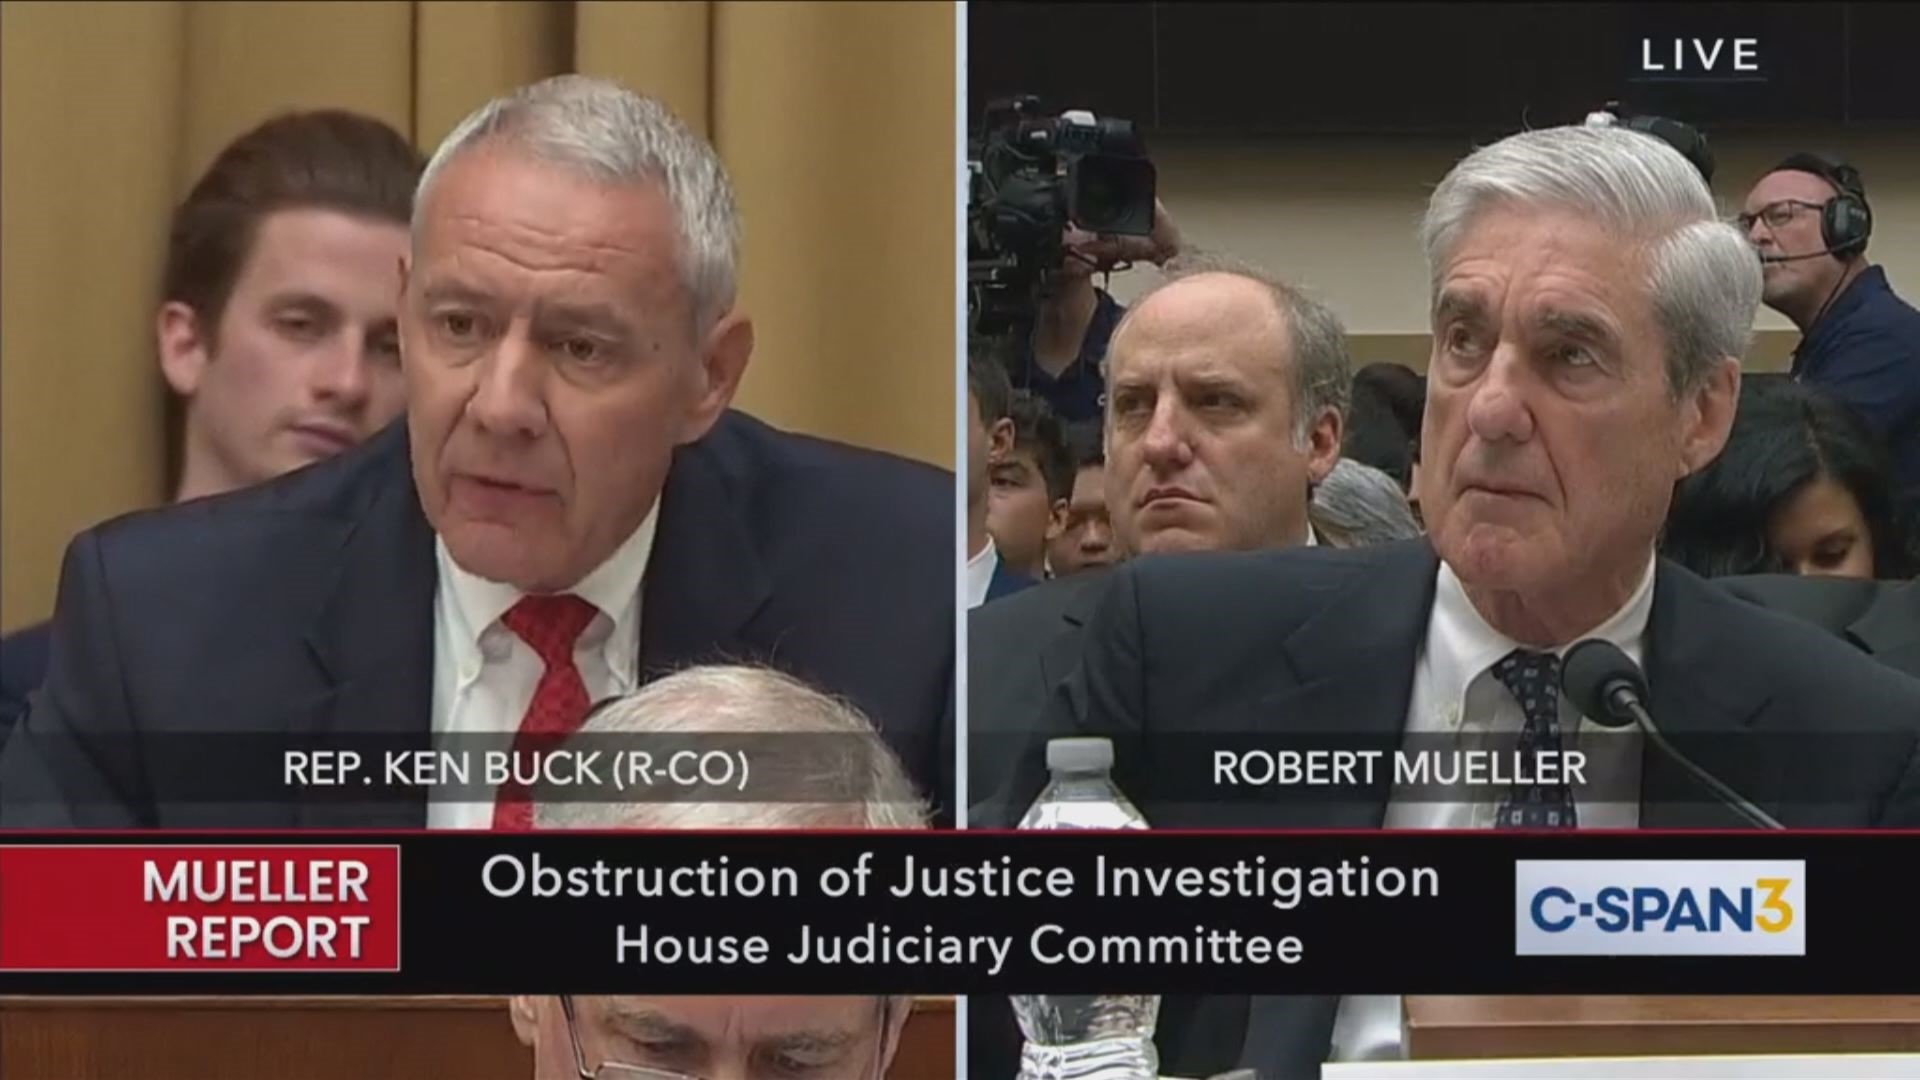 U.S. Rep. Ken Buck (R-Colo.) questions former special counsel Robert Mueller during testimony before the House Judiciary Committee on July 24, 2019. Mueller investigated allegations of Russian interference in the 2016 presidential election, as well as whether Pres. Trump's campaign colluded with the Russian government. Responding to Buck, Mueller said Trump could be indicted after leaving office.